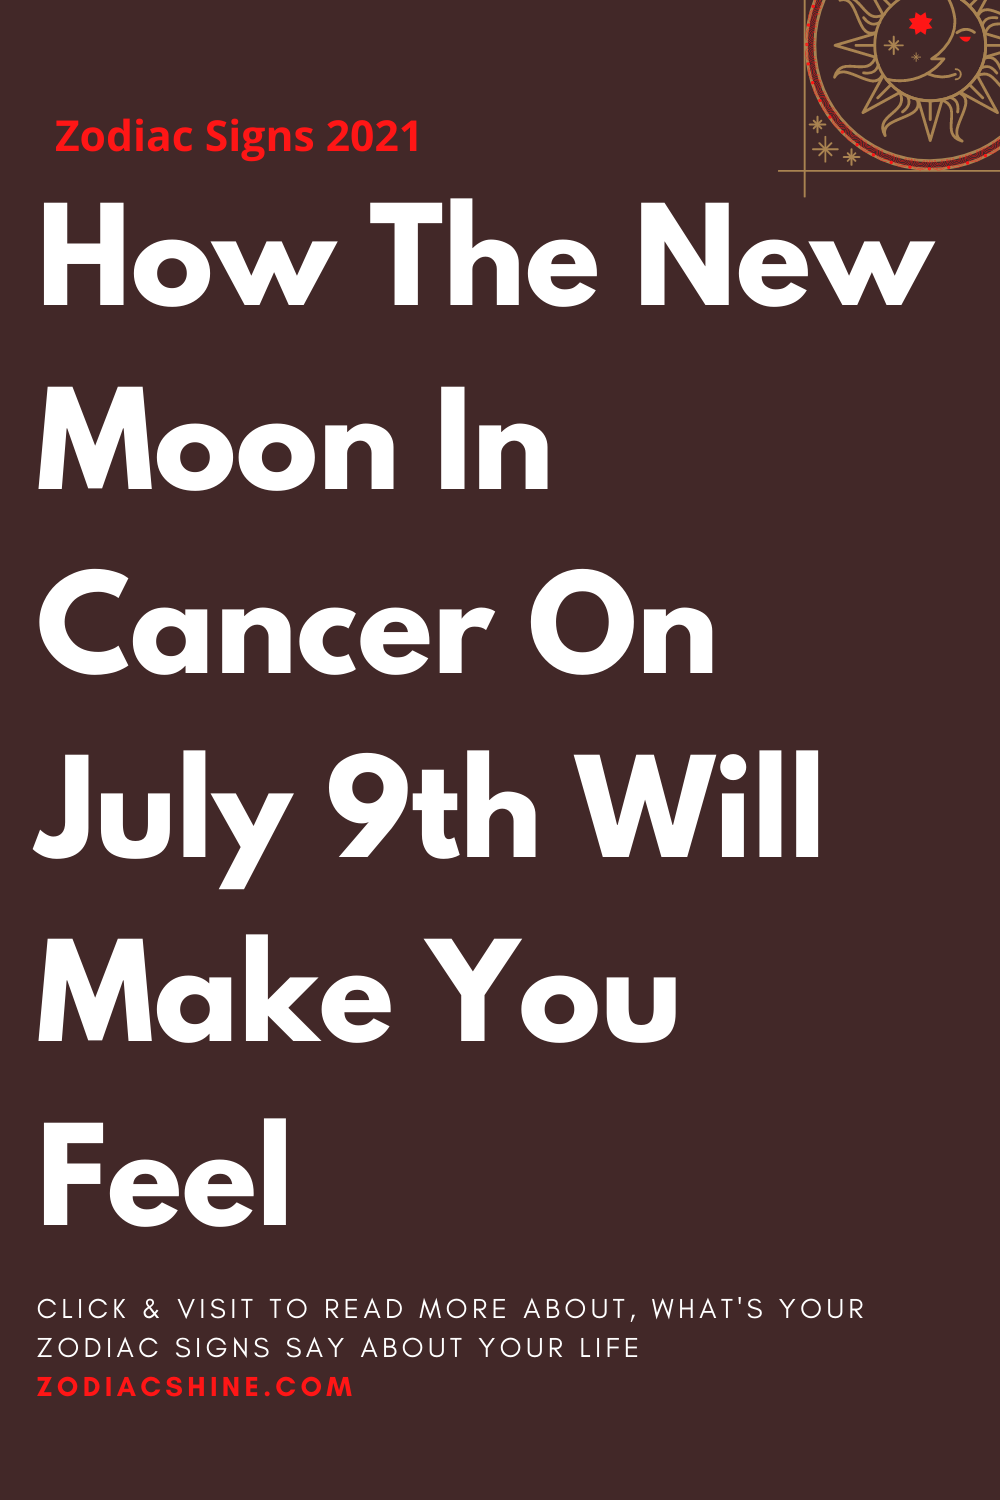 How The New Moon In Cancer On July 9th Will Make You Feel